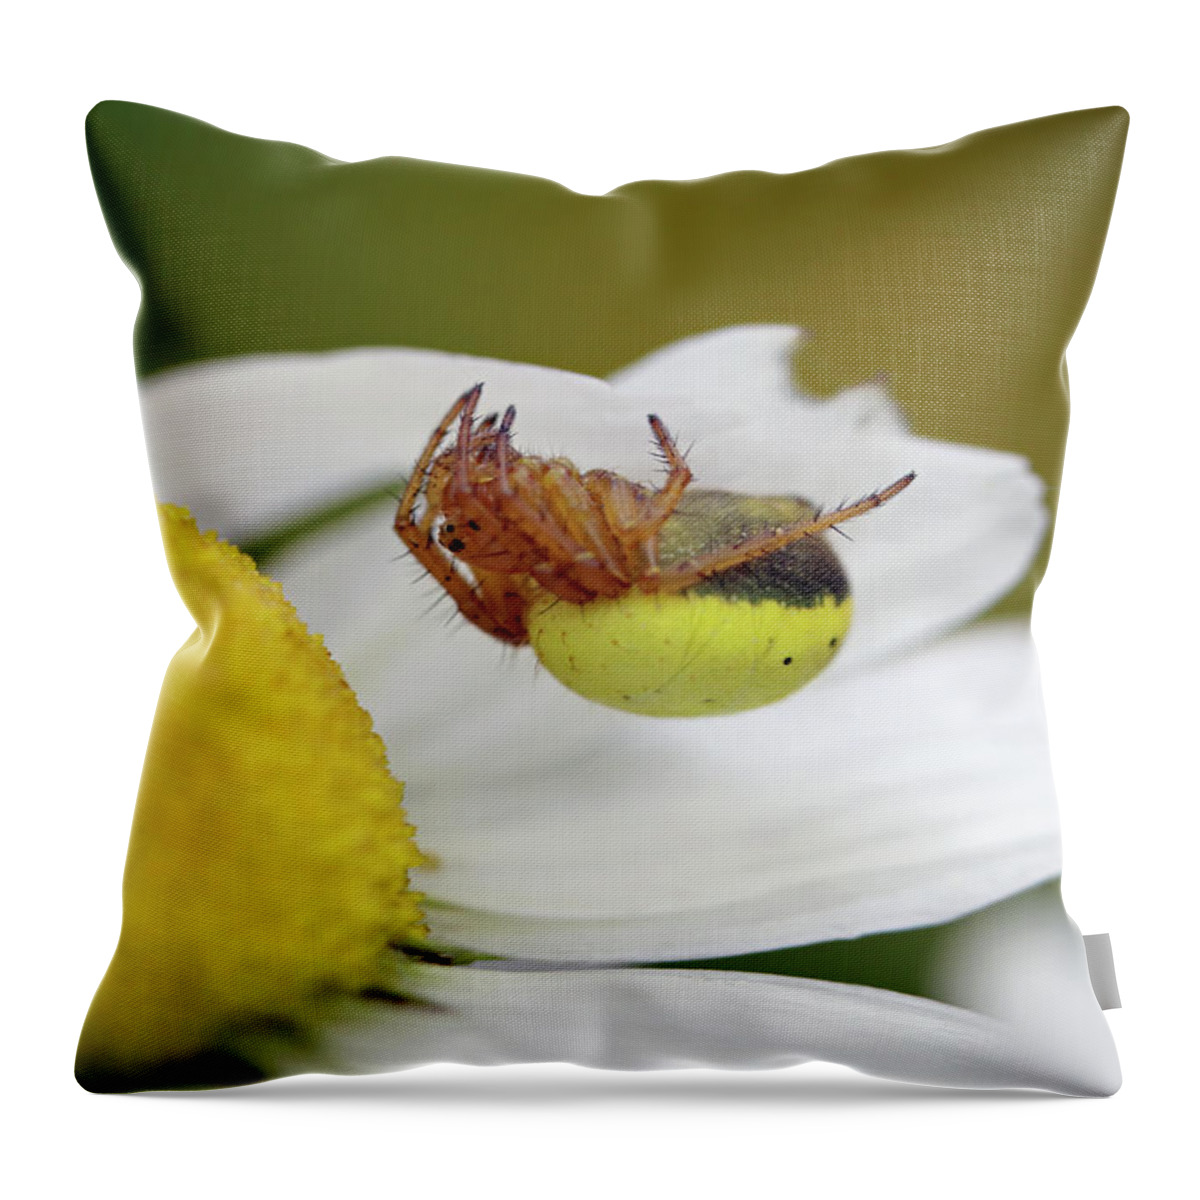  Six Spotted Orb Weaver Throw Pillow featuring the photograph Copycat by Jennifer Robin